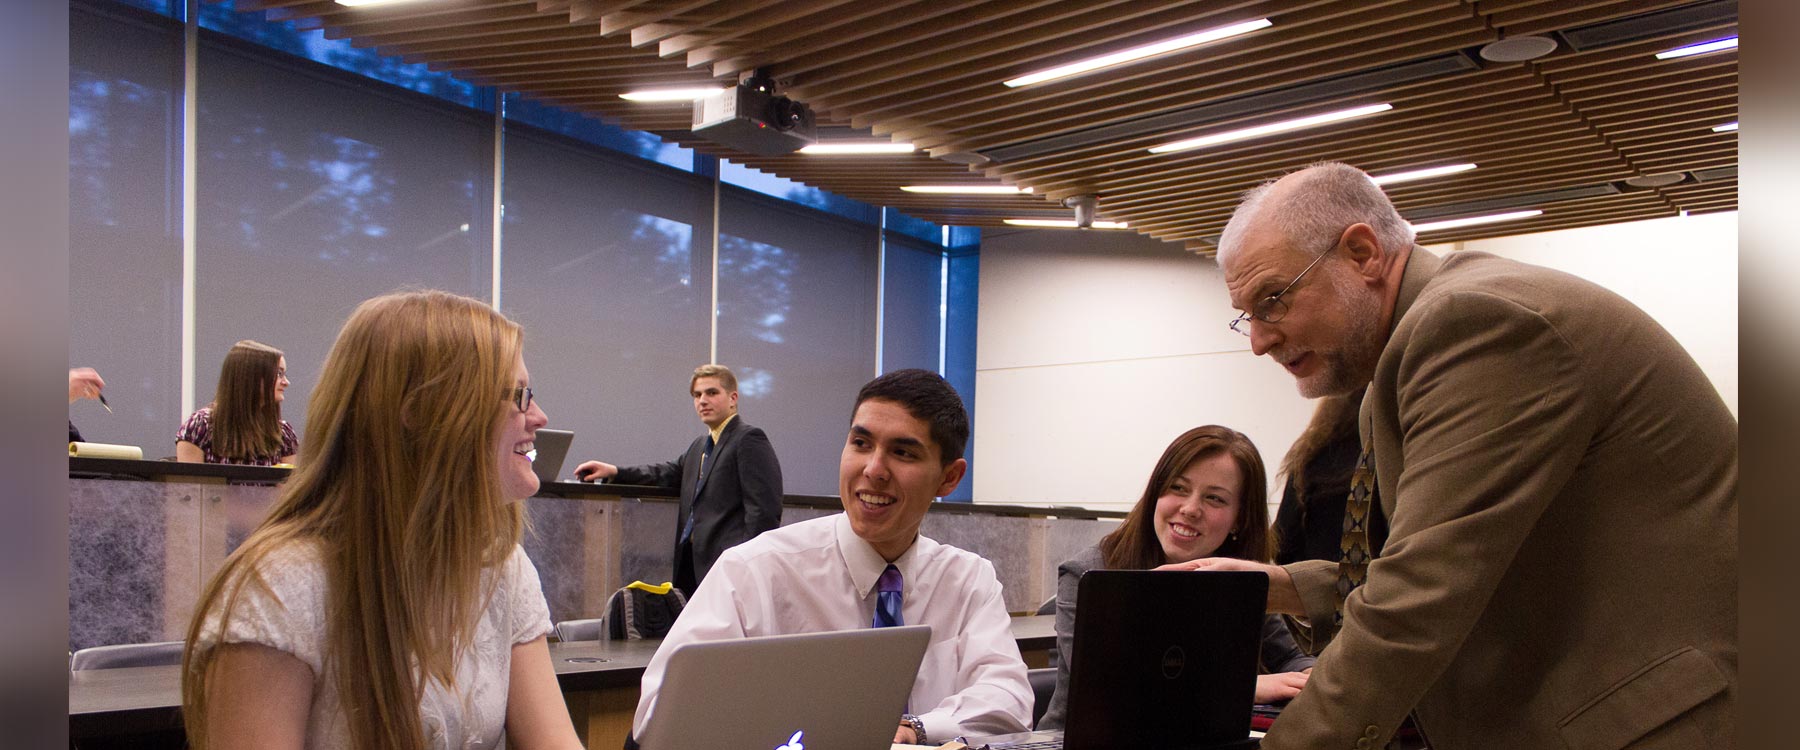 A professor converses with three students working on laptops in a modern classroom.